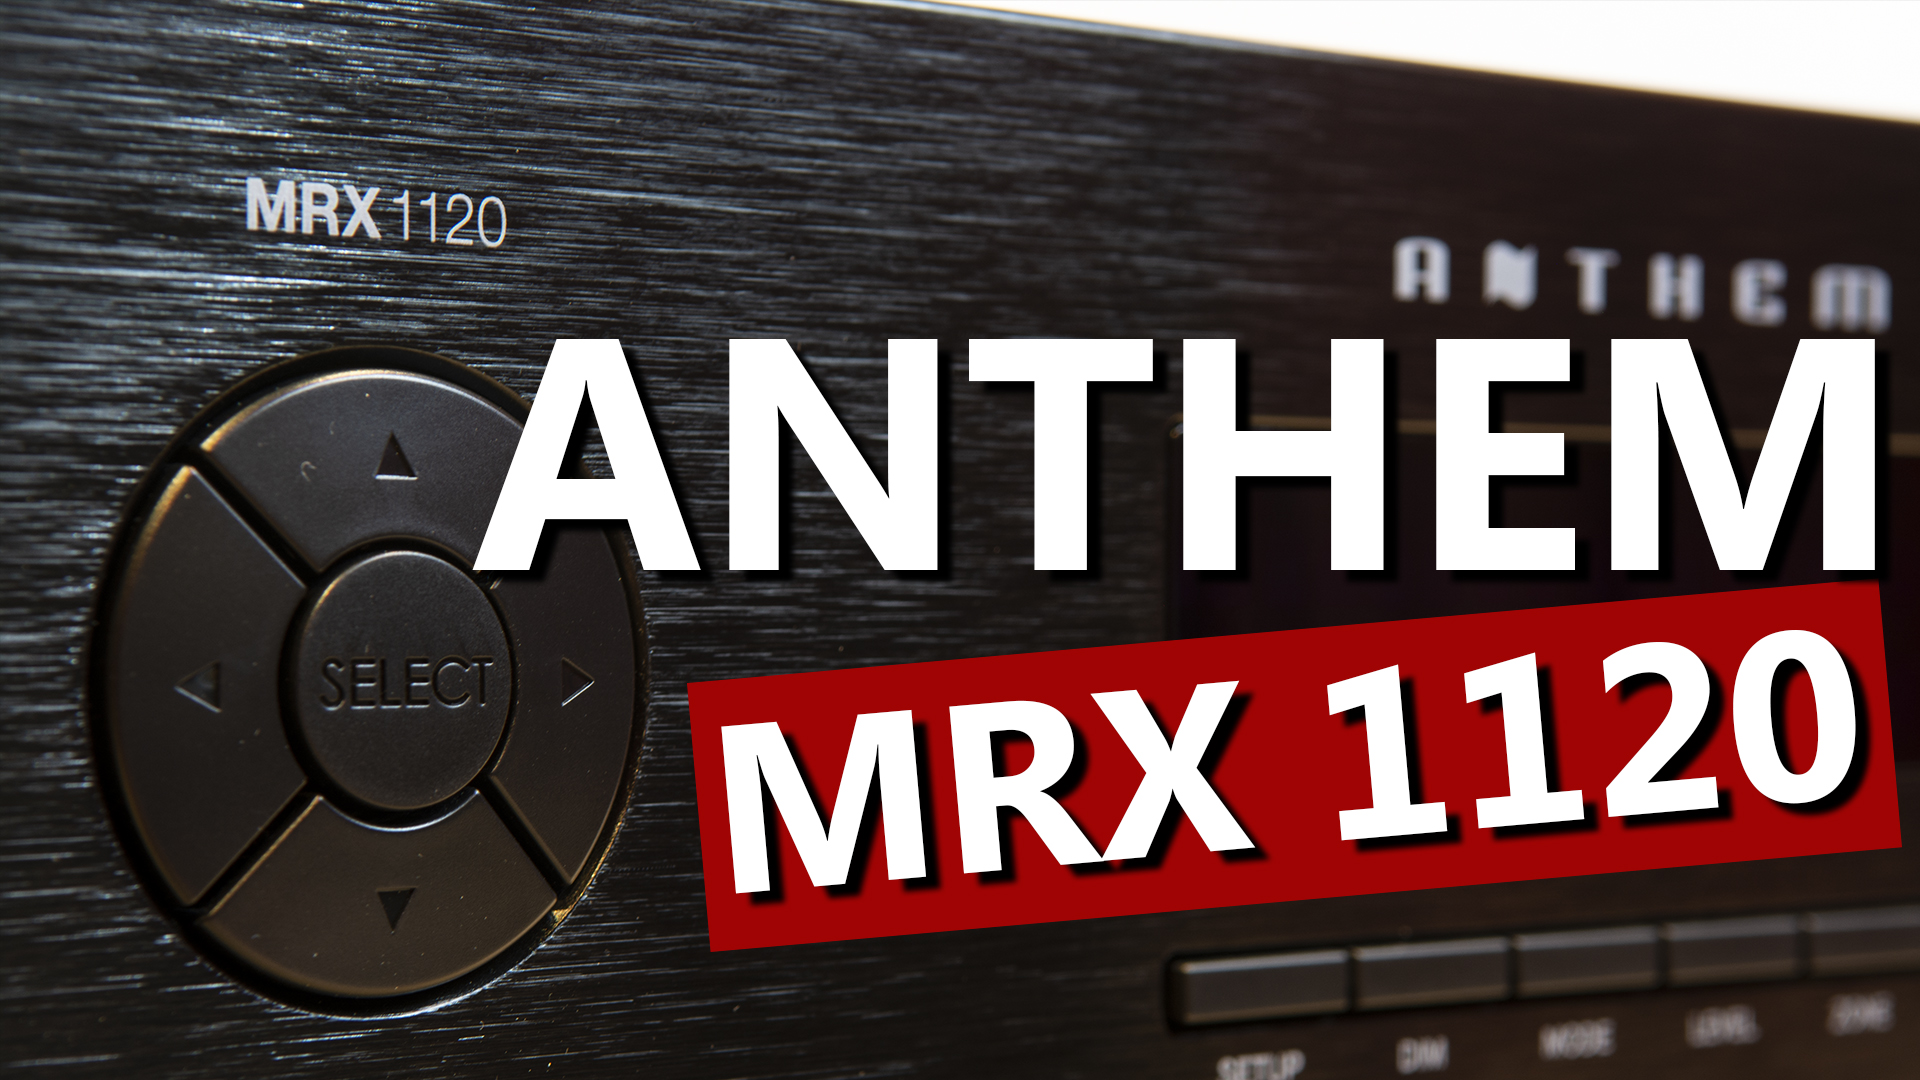 Anthem MRX 1120 11.2 Dolby Atmos Receiver - Unboxing and Overview